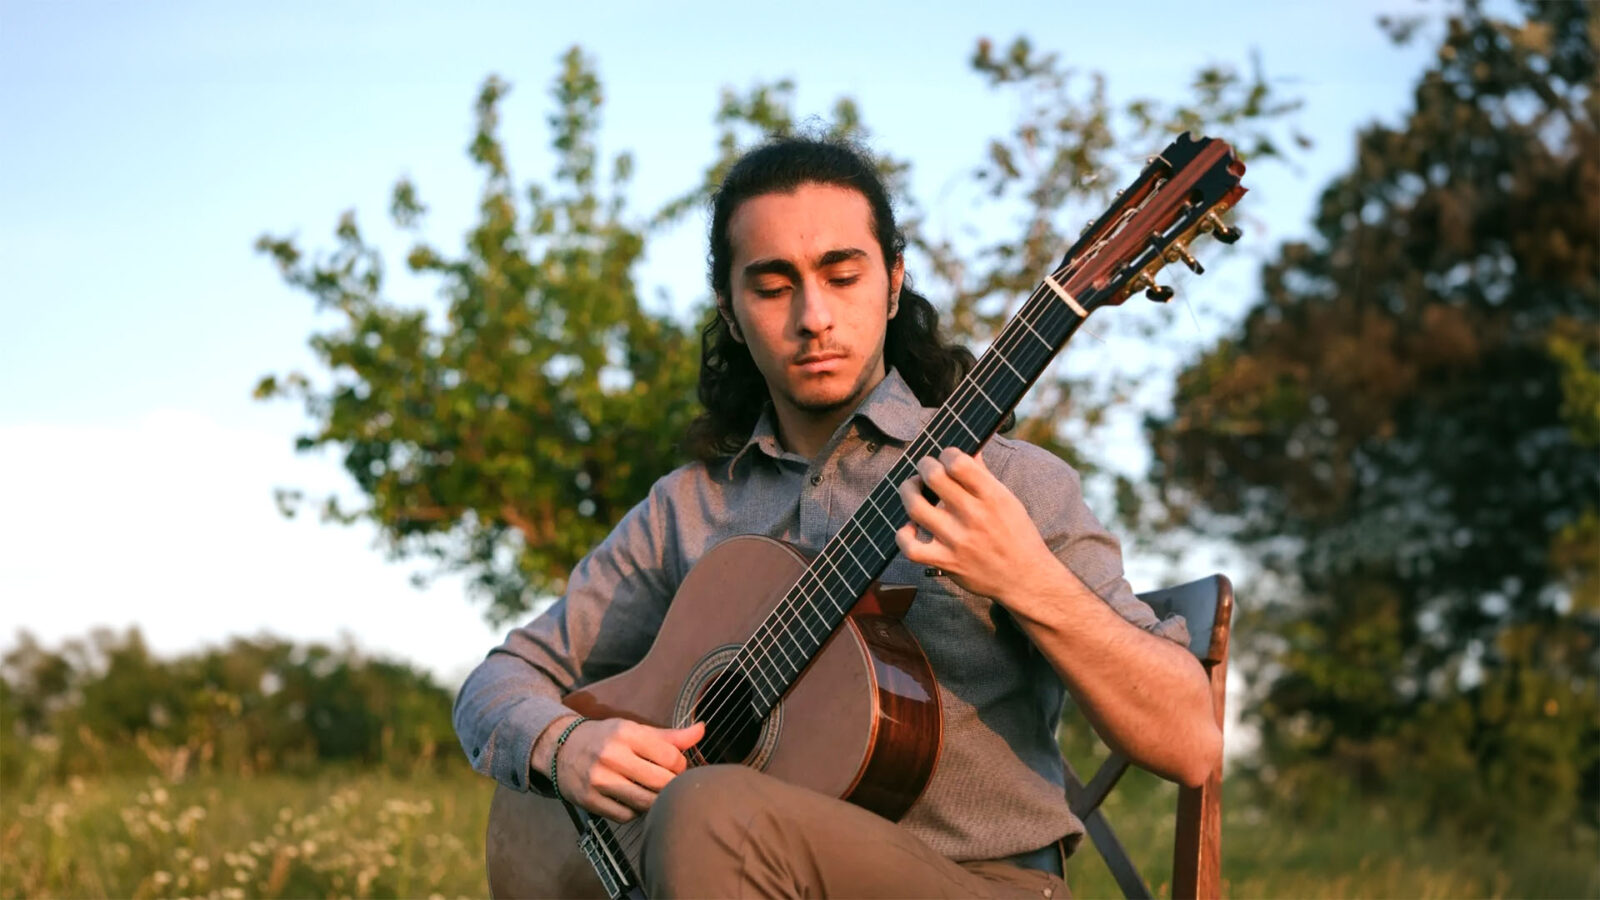 NJIO soloist Baran Güzelsoy playing guitar in the outdoors, under a blue sky